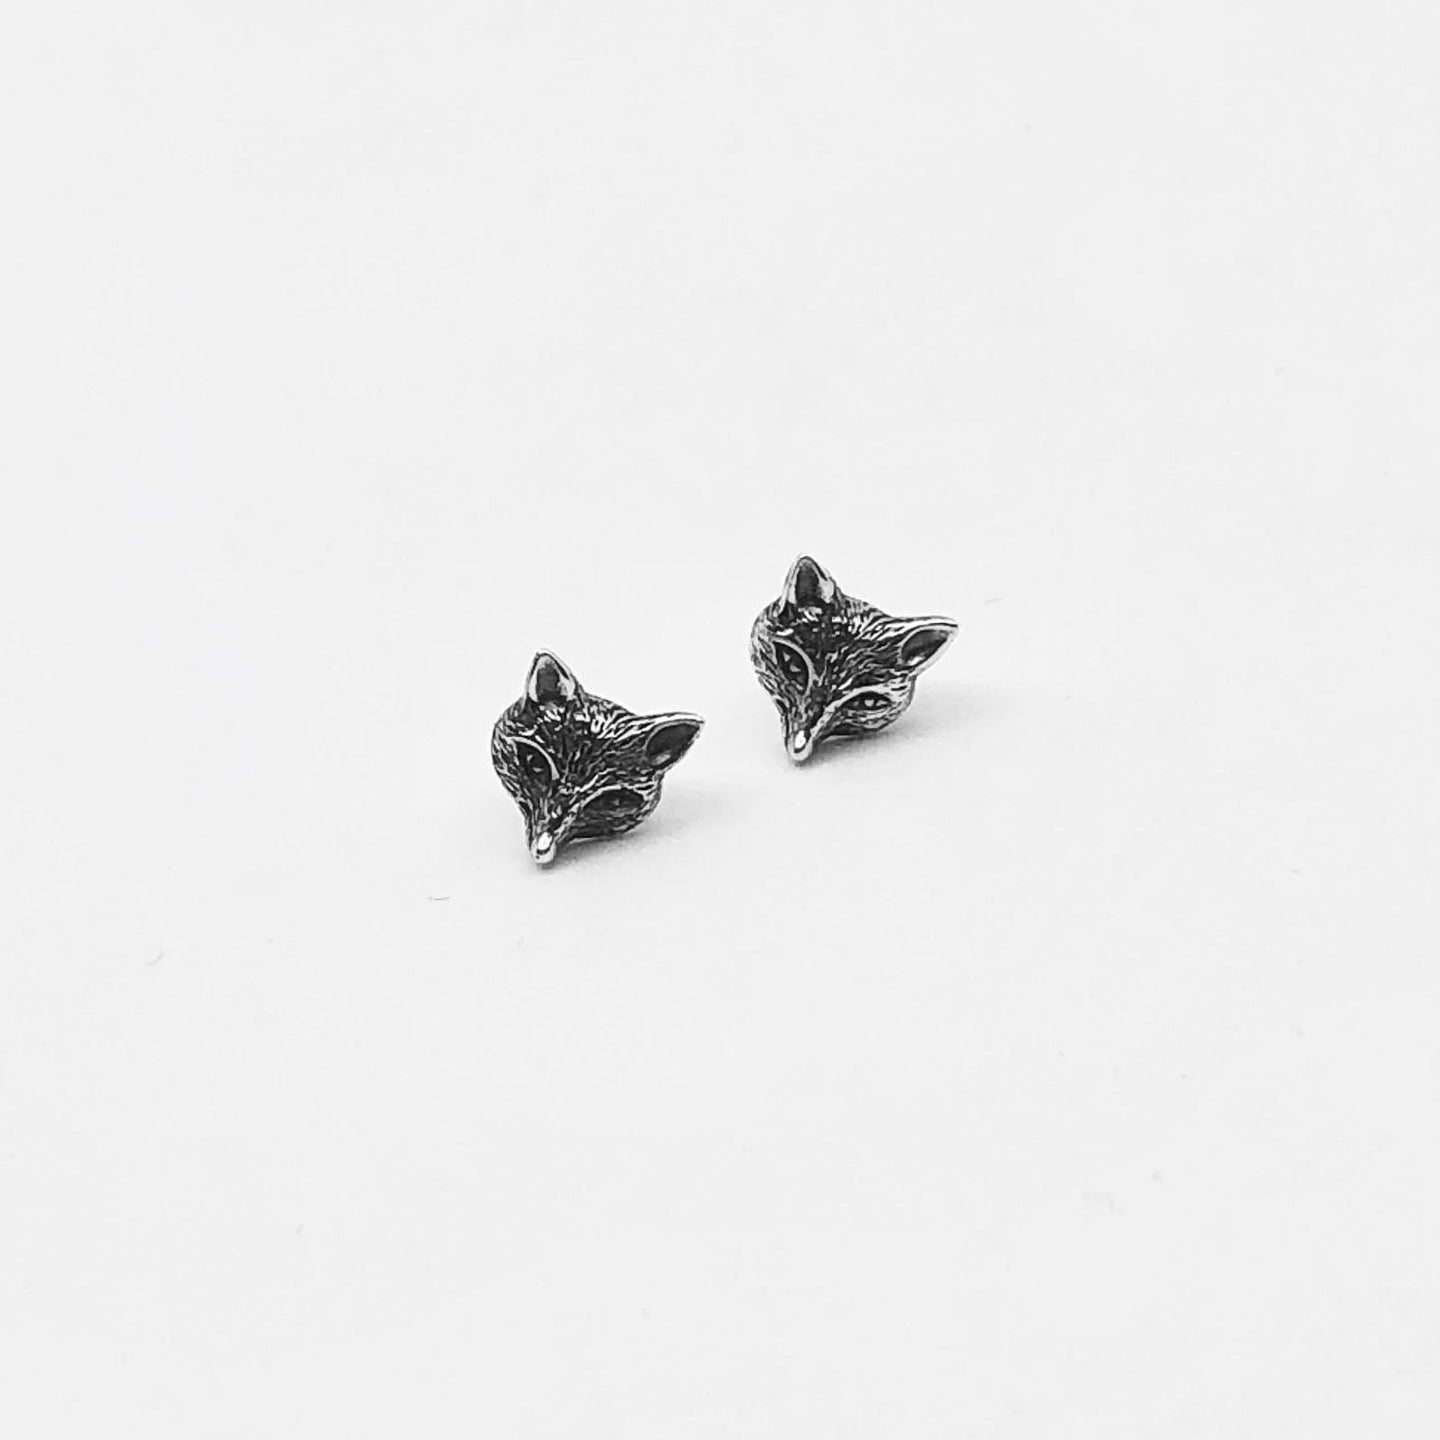 SOME Foxy Studs Sterling Silver